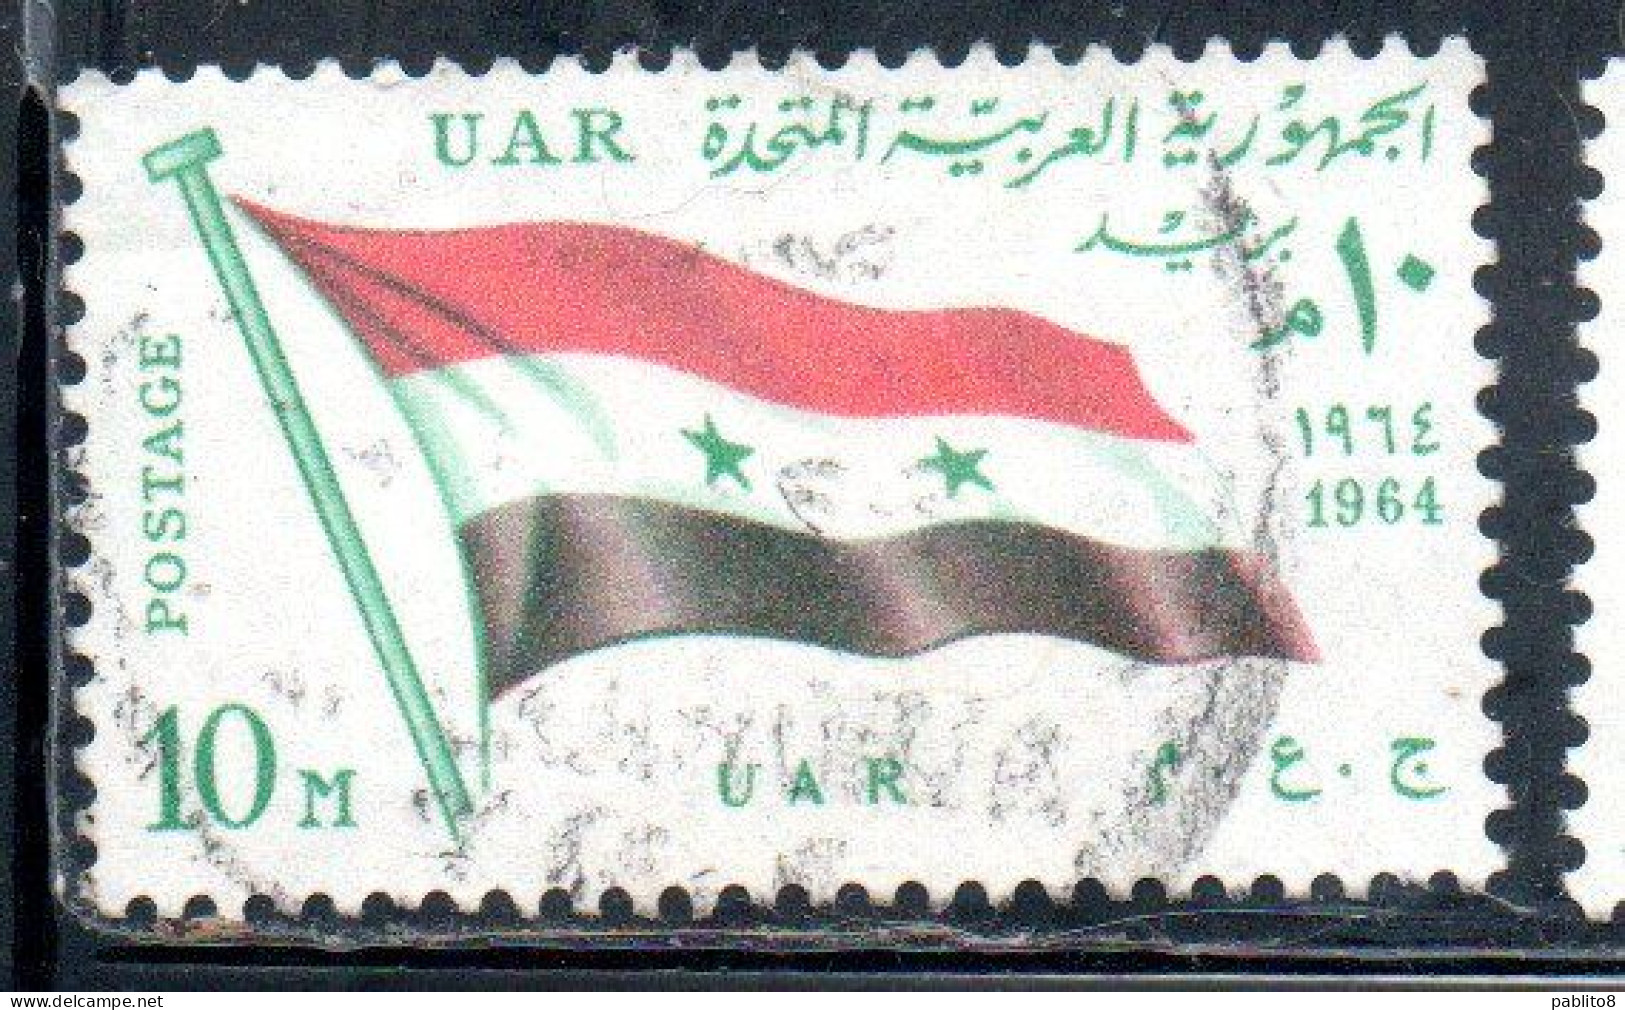 UAR EGYPT EGITTO 1964 SECOND MEETING OF HEADS STATE ARAB LEAGUE FLAG OF UAR 10m USED USATO OBLITERE' - Used Stamps